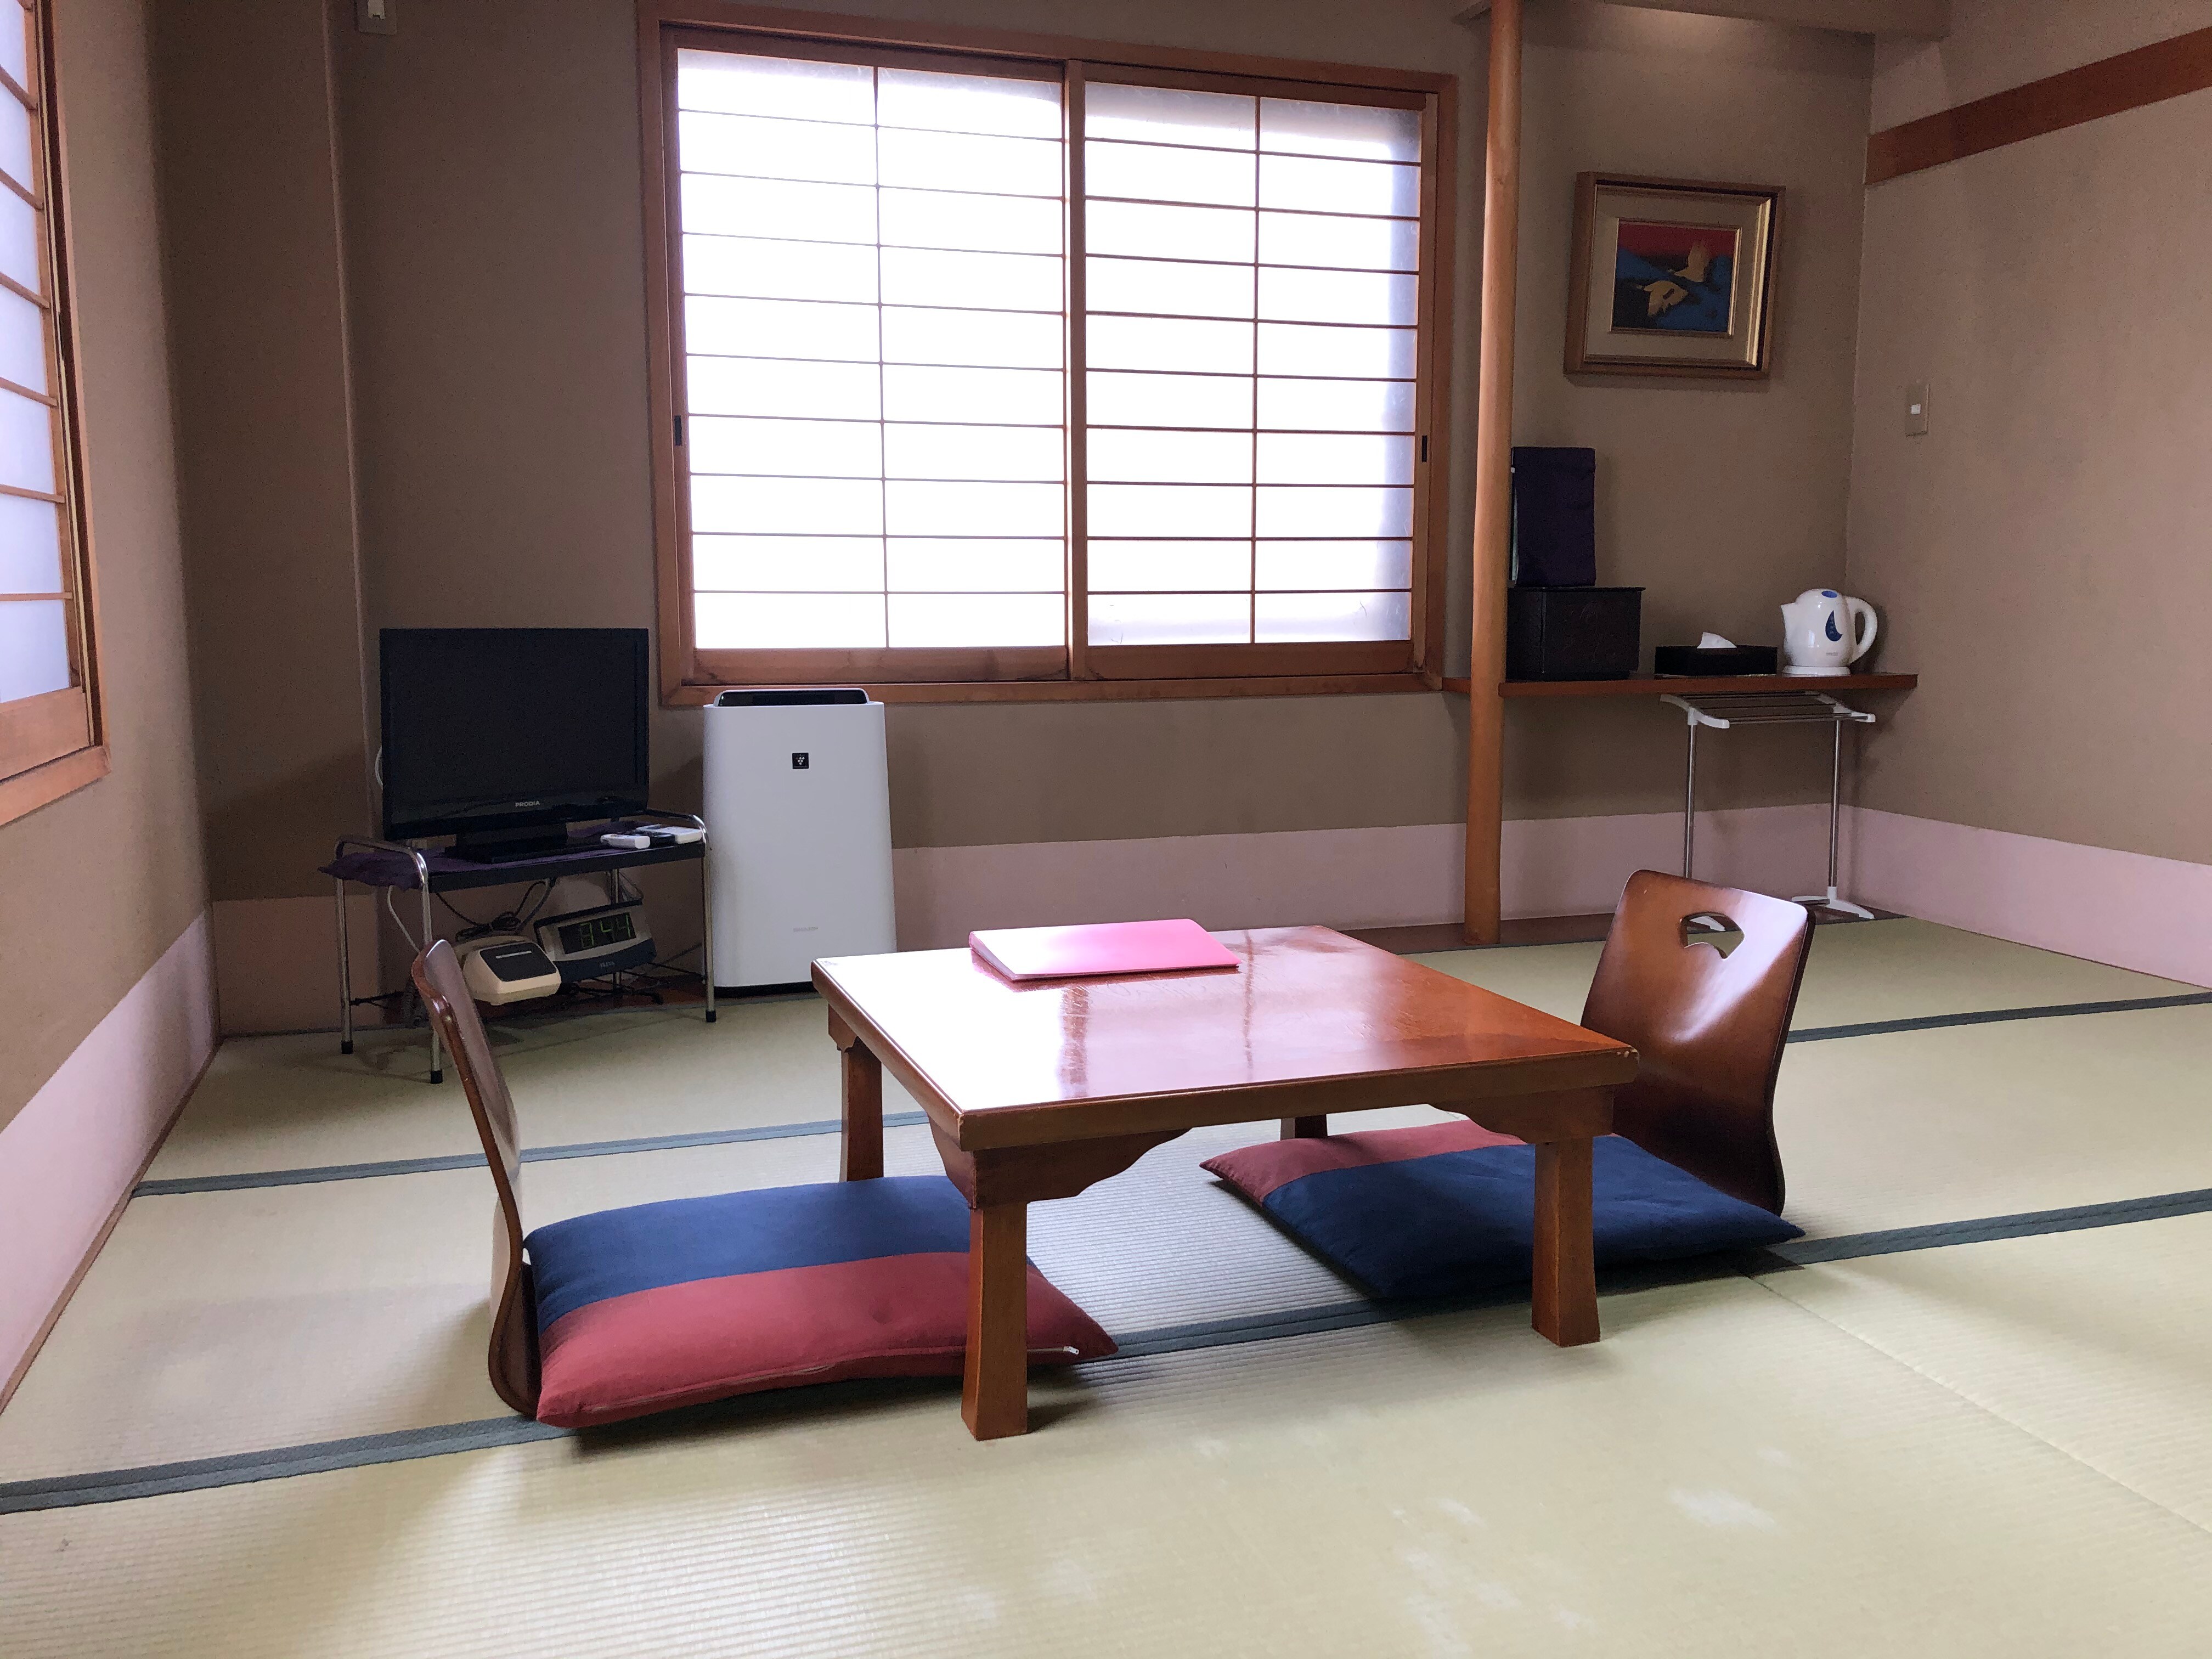 Room example 2 Japanese-style room for 2 people